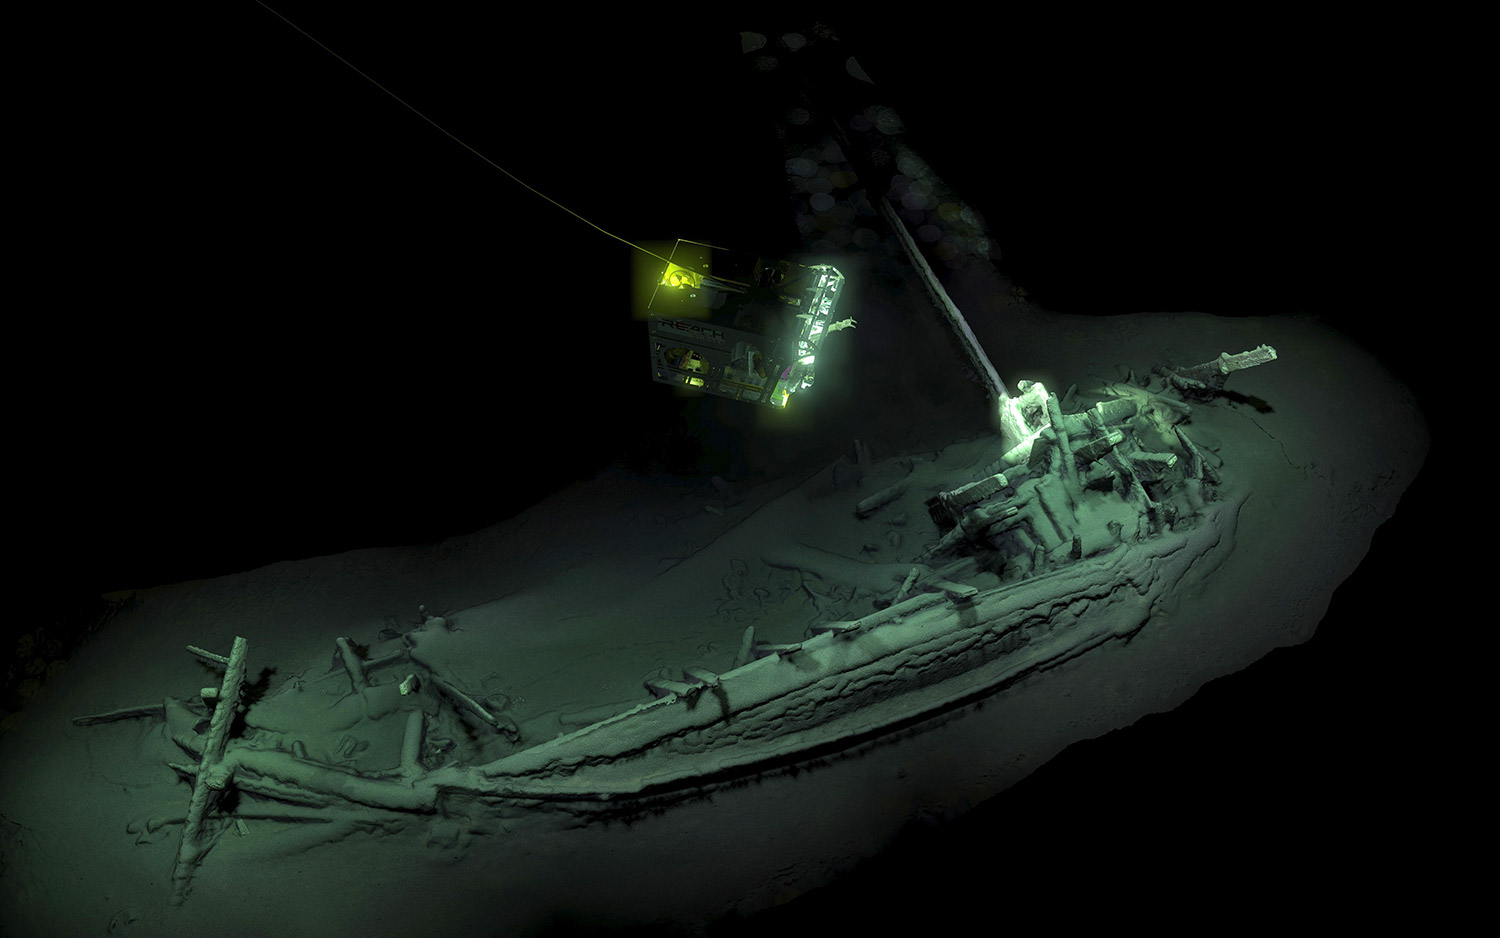 World S Oldest Intact Shipwreck Found At The Bottom Of The